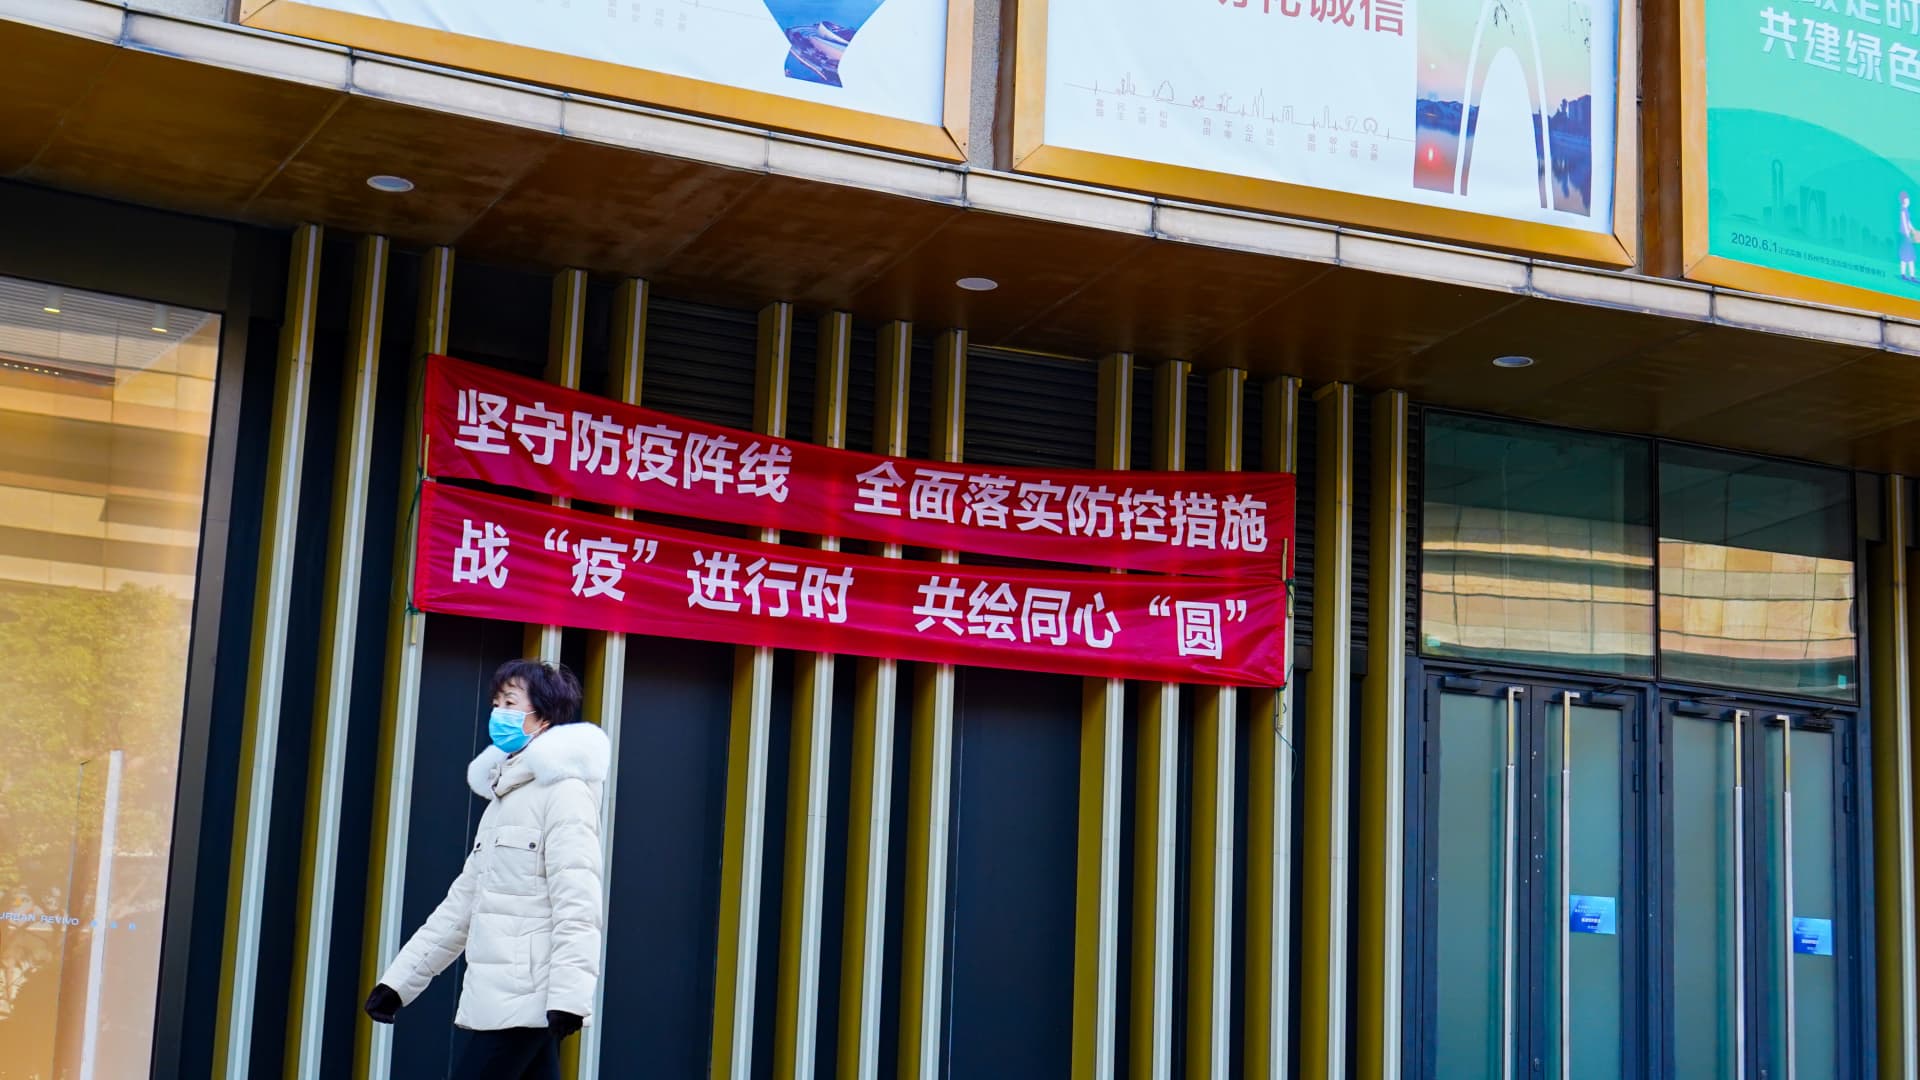 China's Covid lockdowns are hitting more of the country beyond Shanghai and Beijing